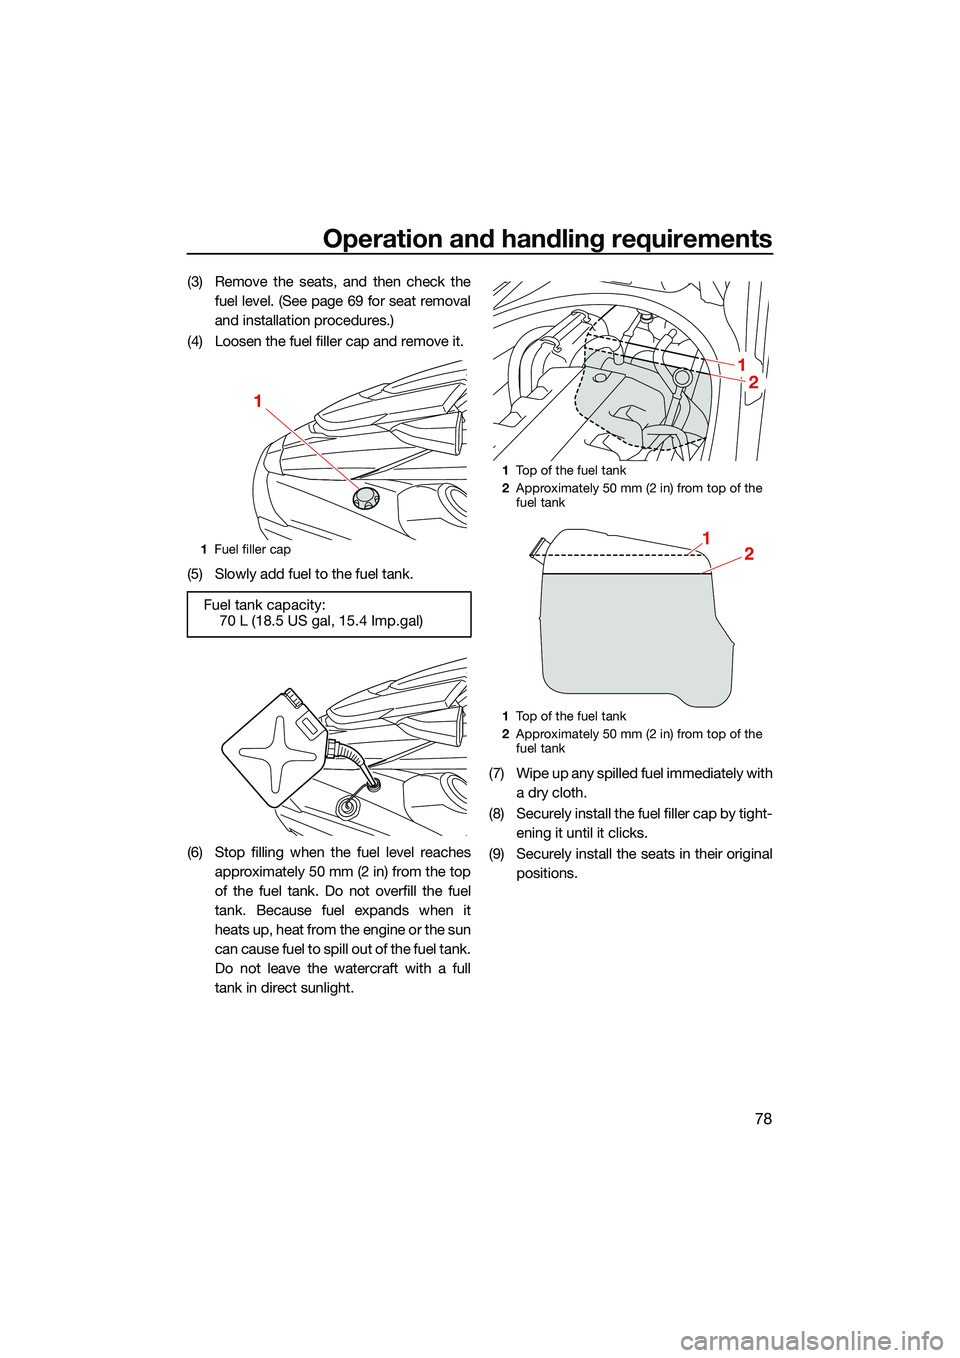 YAMAHA FX HO CRUISER 2022 Manual Online Operation and handling requirements
78
(3) Remove the seats, and then check thefuel level. (See page 69 for seat removal
and installation procedures.)
(4) Loosen the fuel filler cap and remove it.
(5)